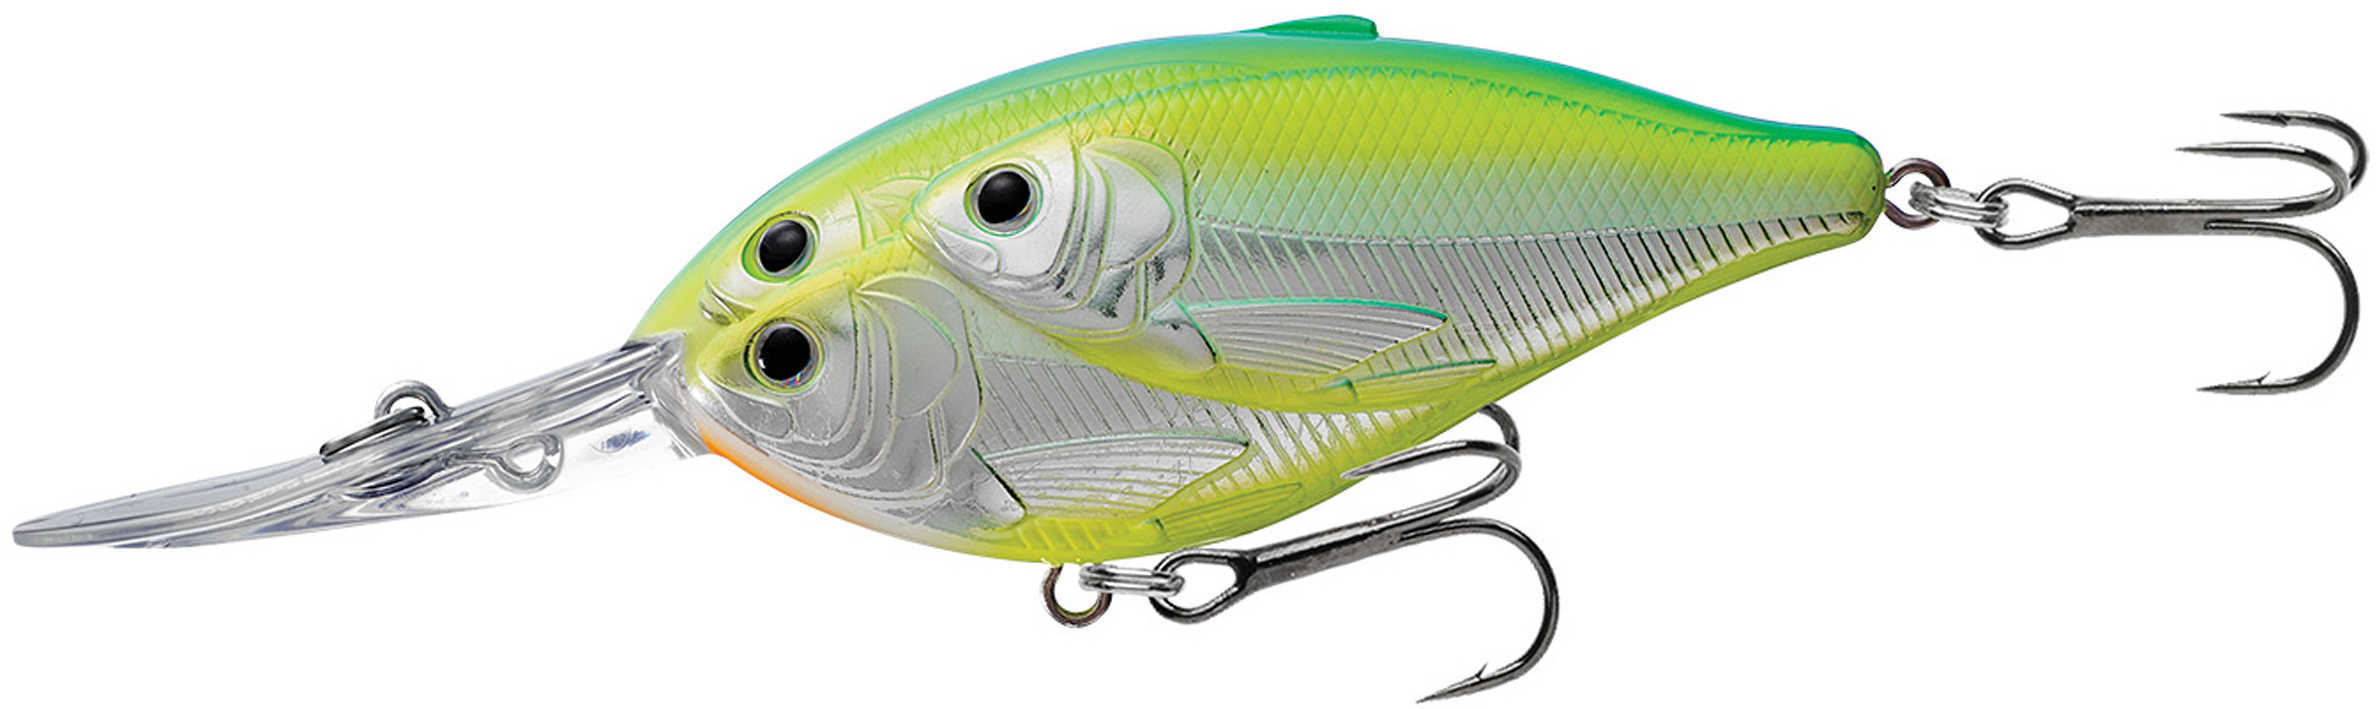 LIVETARGET Lures / Koppers Fishing and Tackle Corp Threadfin Shad Crankbait 3" Number 2 Hook Size 16 Depth Metallic Citrus